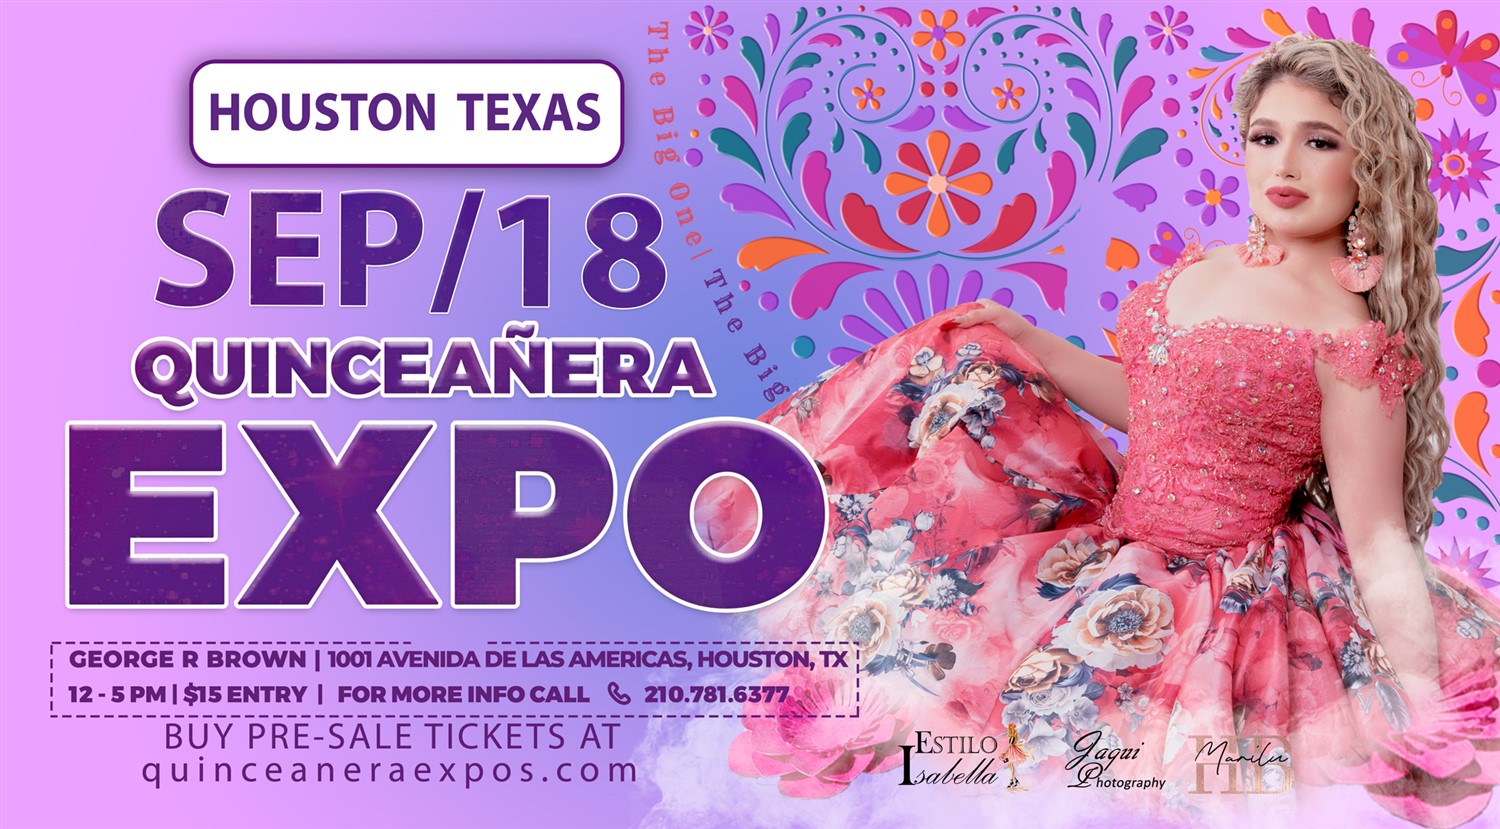 Quinceanera Expo Houston 09-18-2022 12-5pm at George R. Brown  on sep. 18, 12:00@George R. Brown Convention Center - Buy tickets and Get information on Quinceanera Expo 